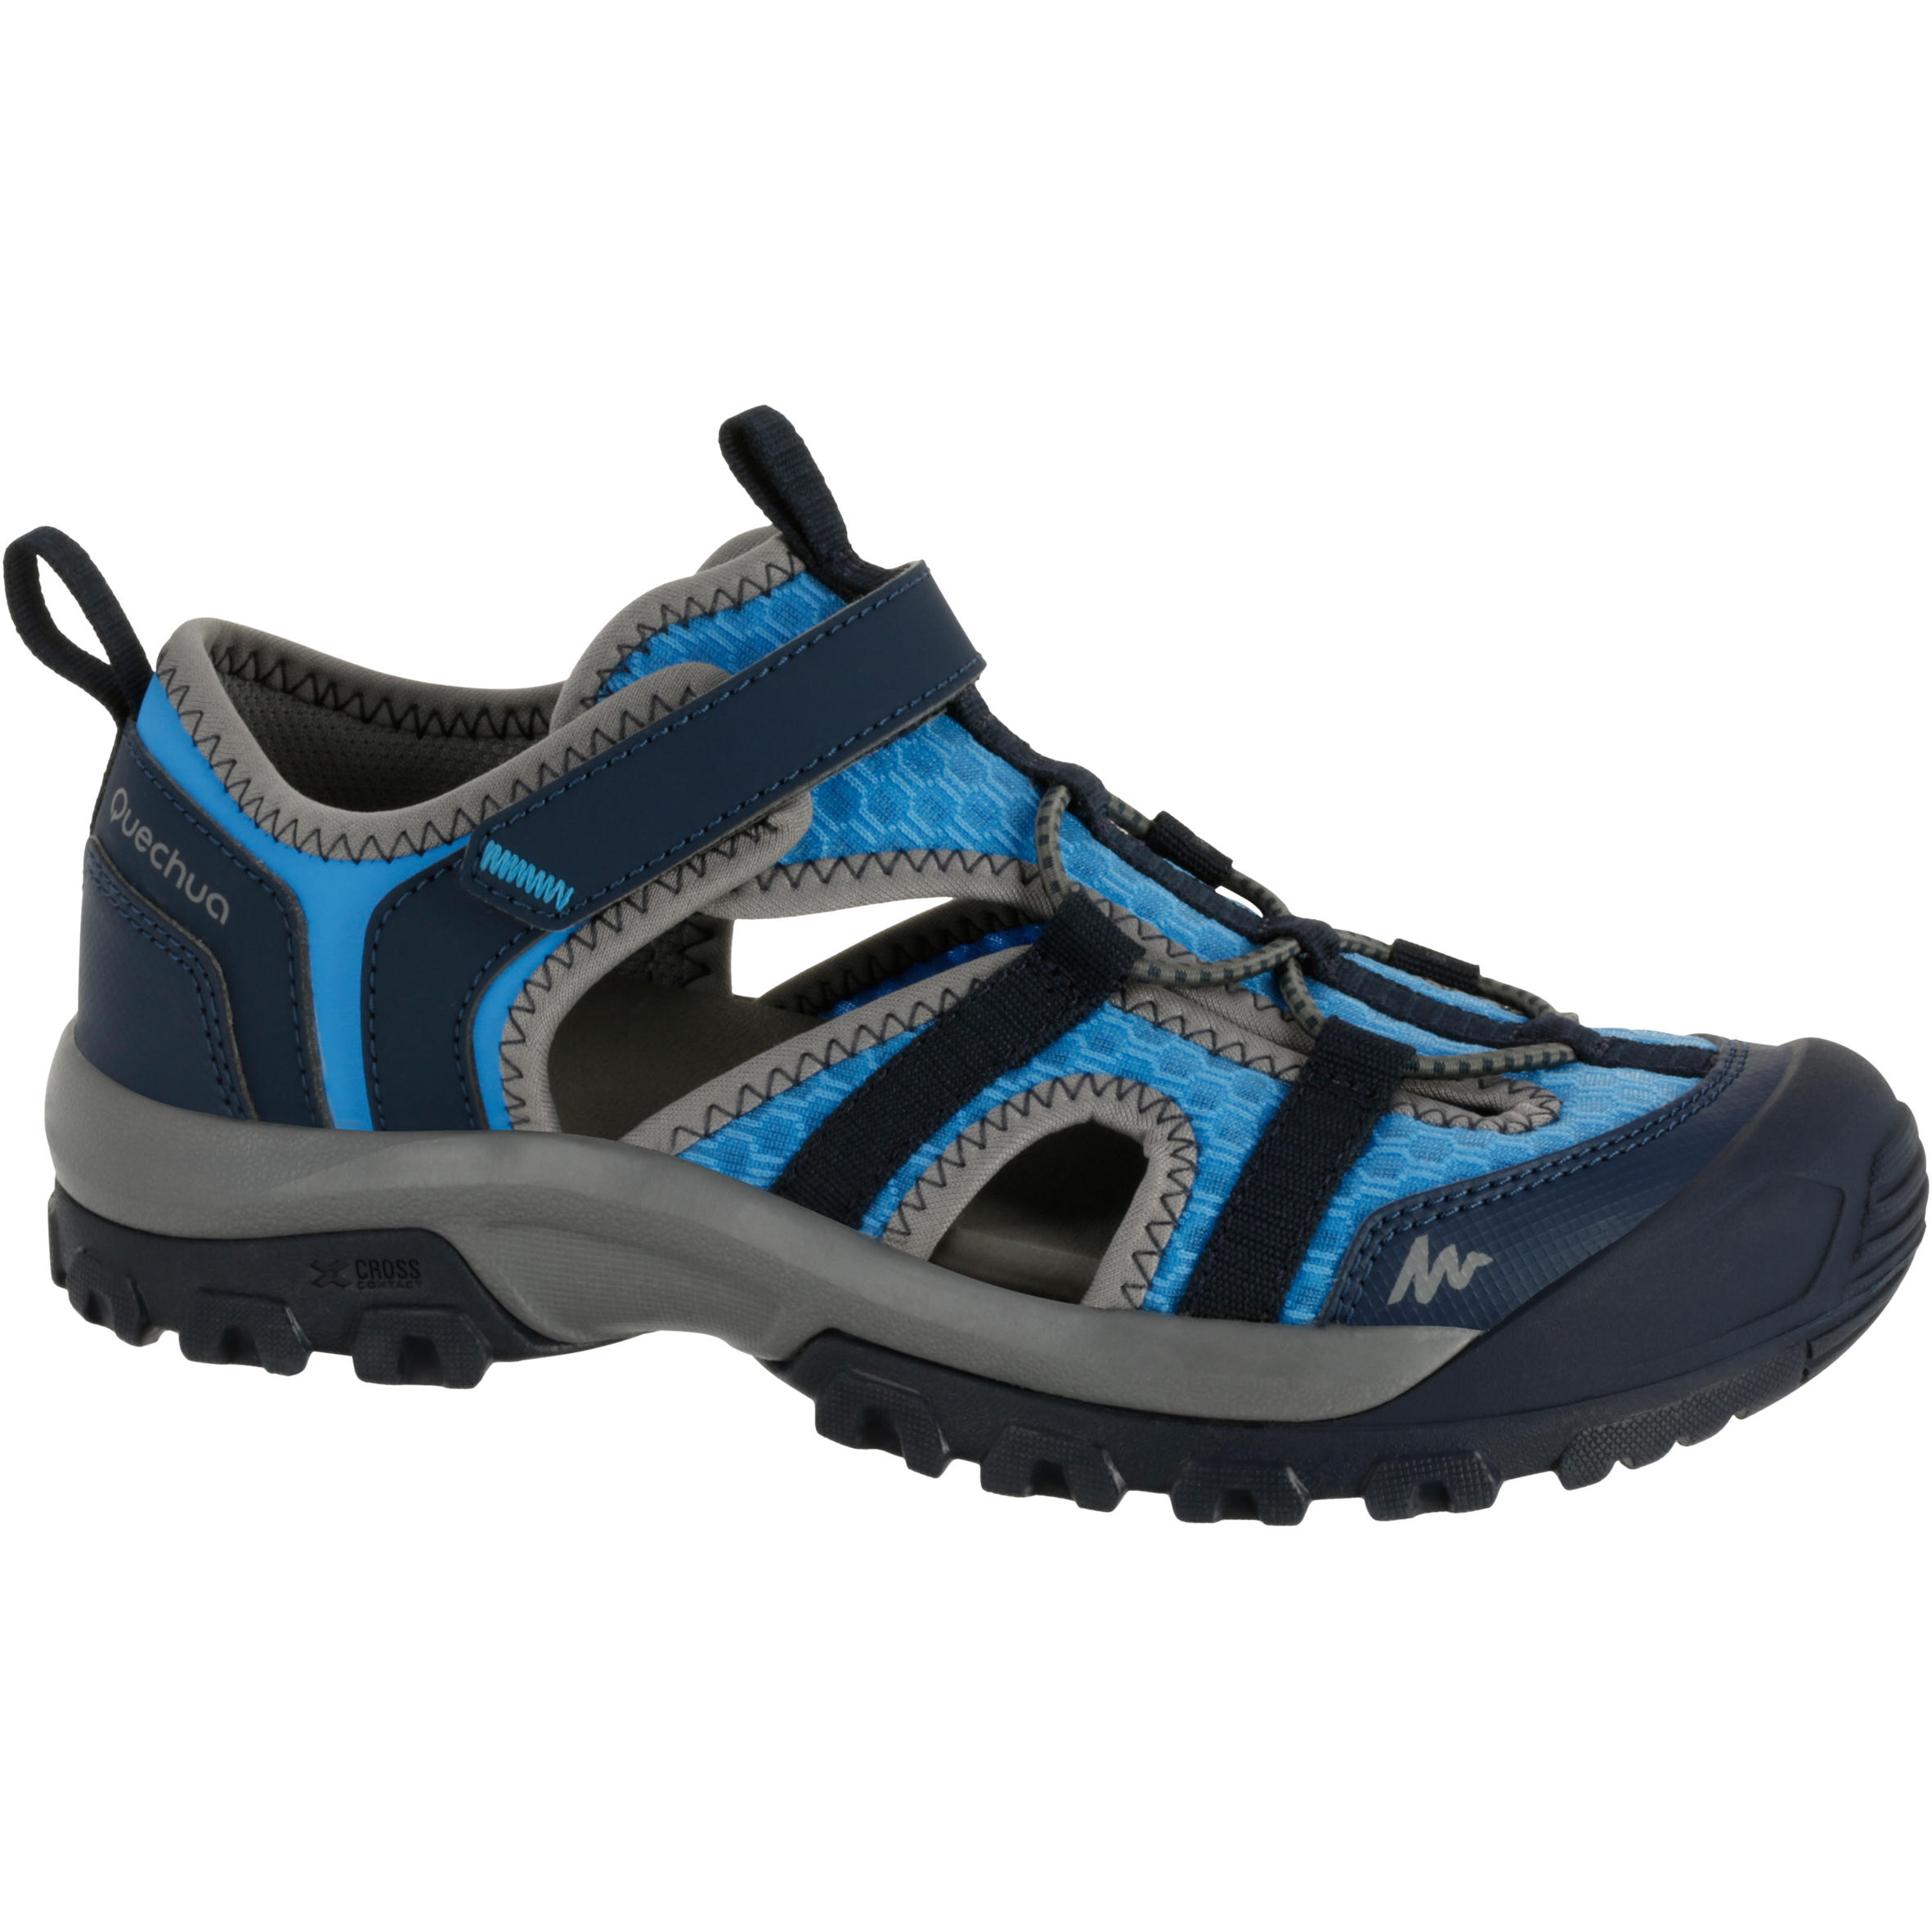 QUECHUA Kids’ Hiking Sandals MH150 - size 10 to 6 - Blue